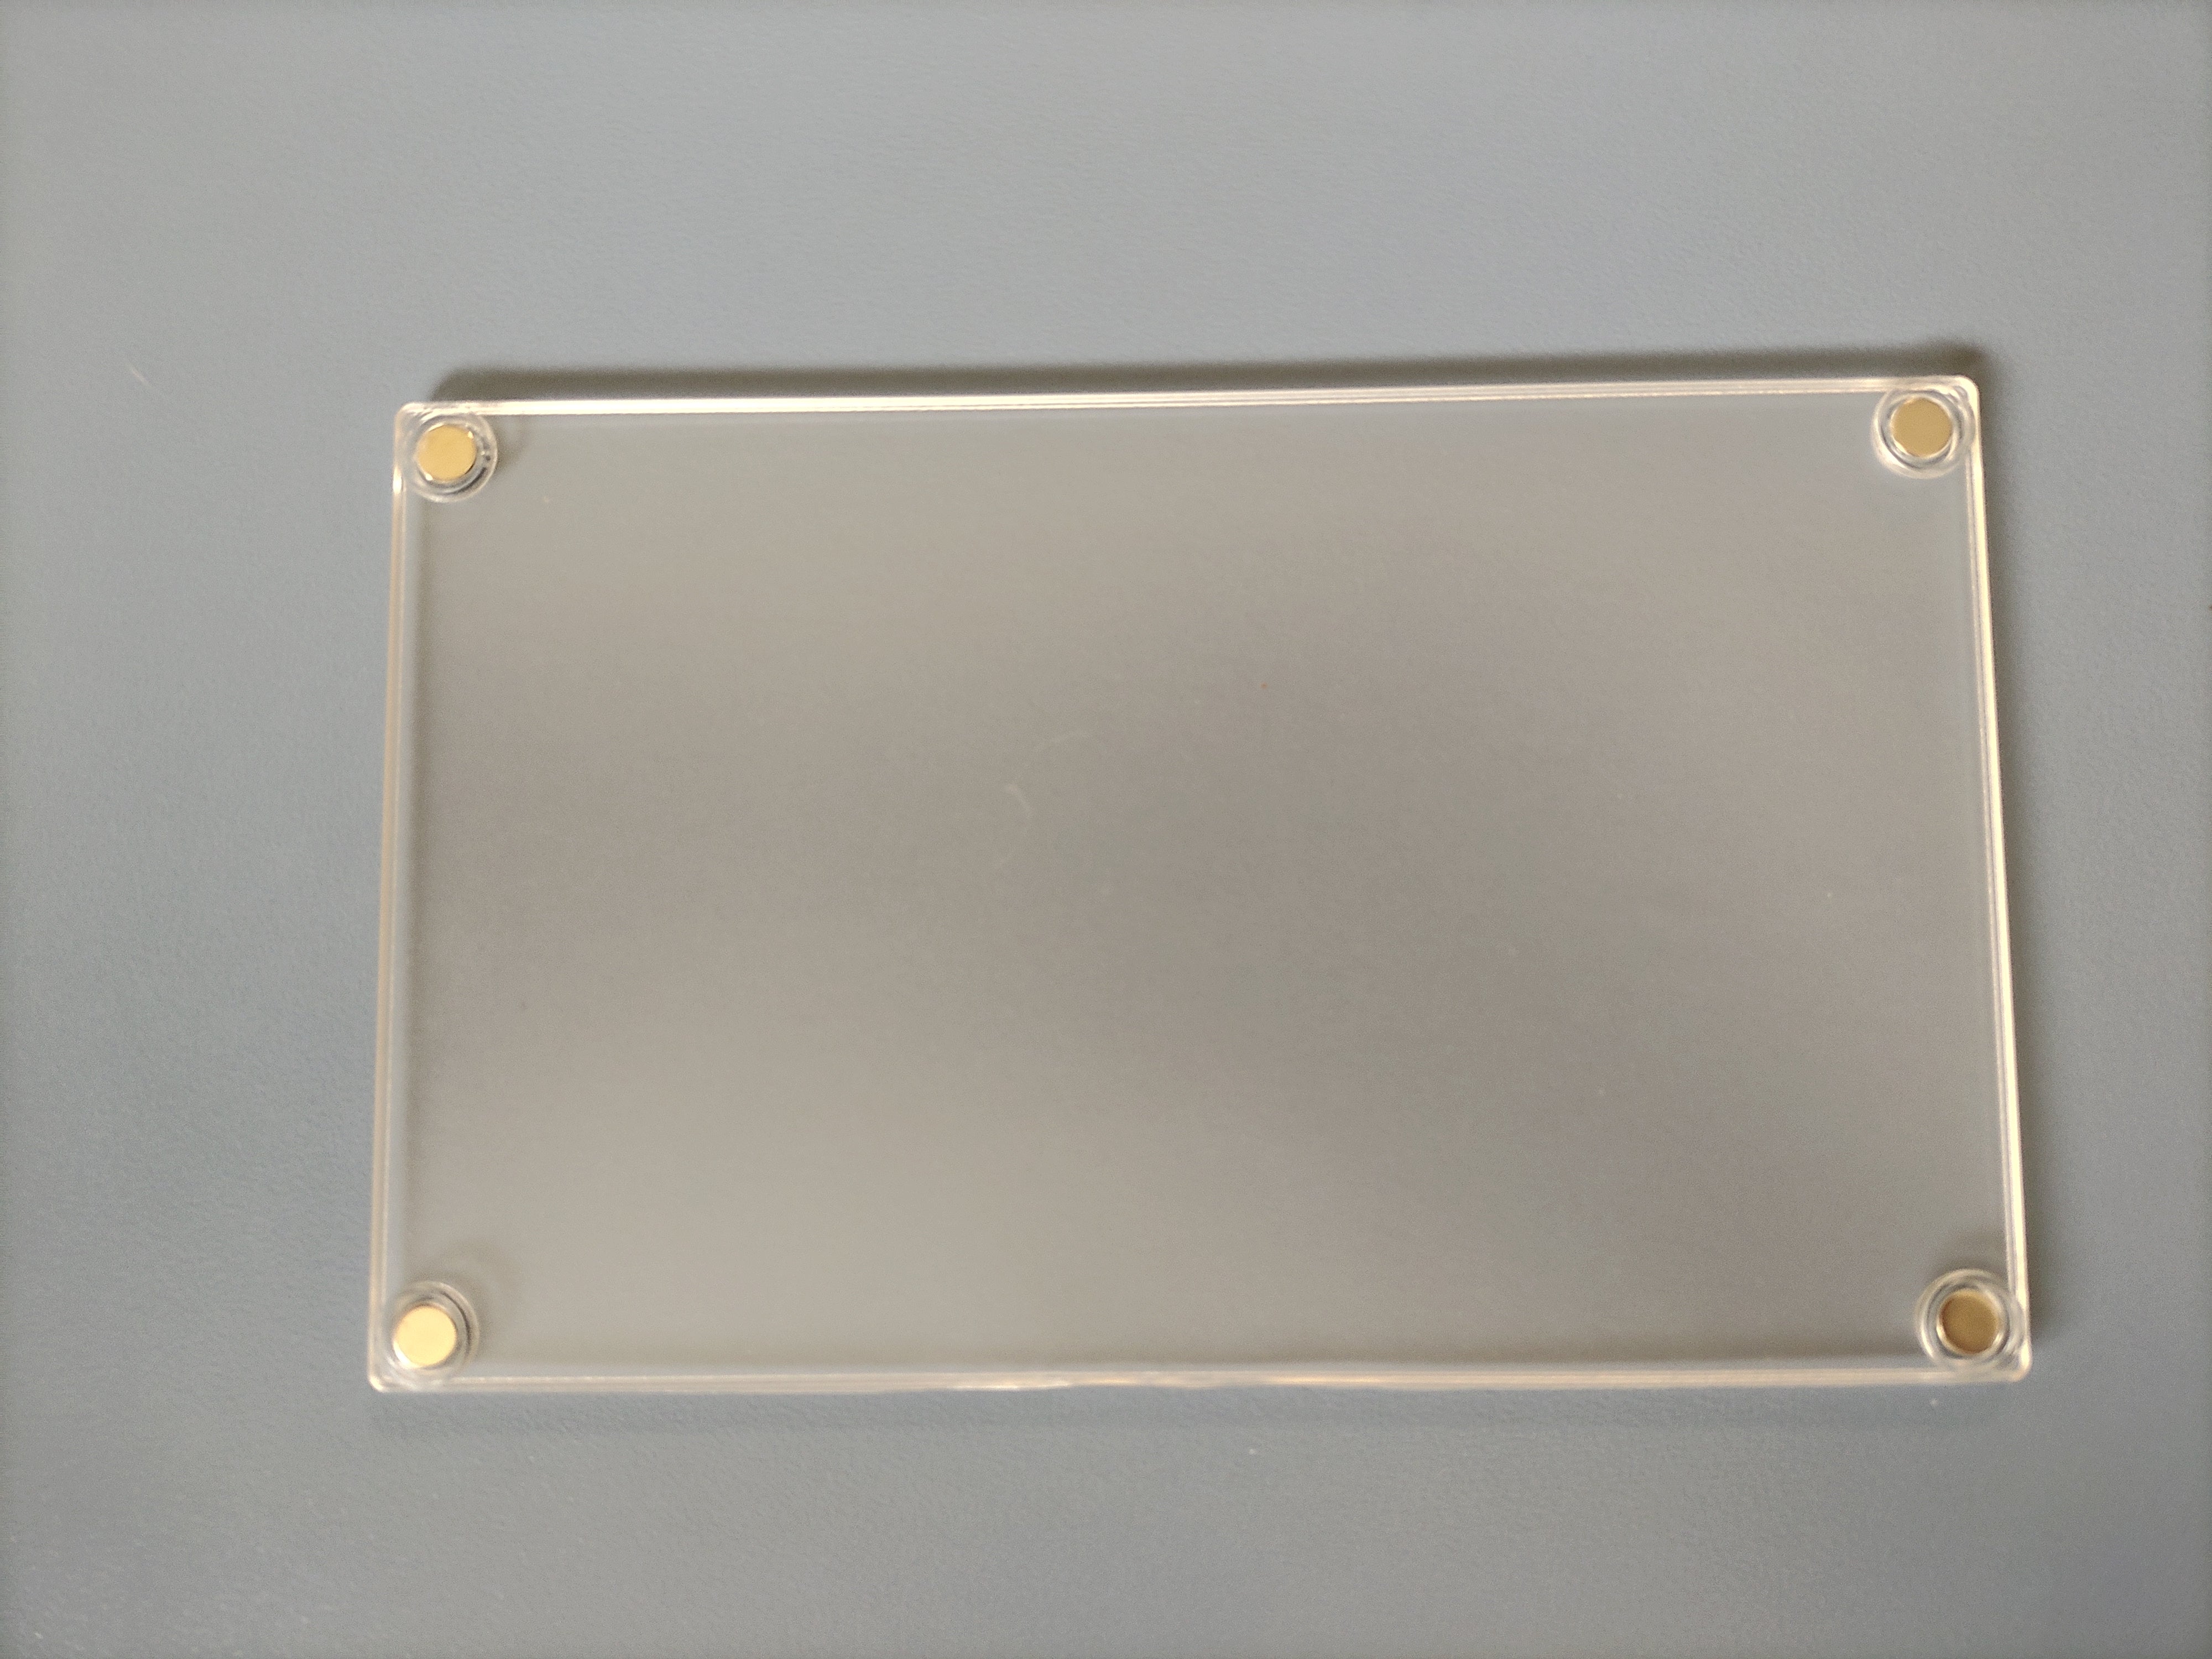 OEM Replacement Part - Fotodiox Pro LED-209AS Diffusion Panel